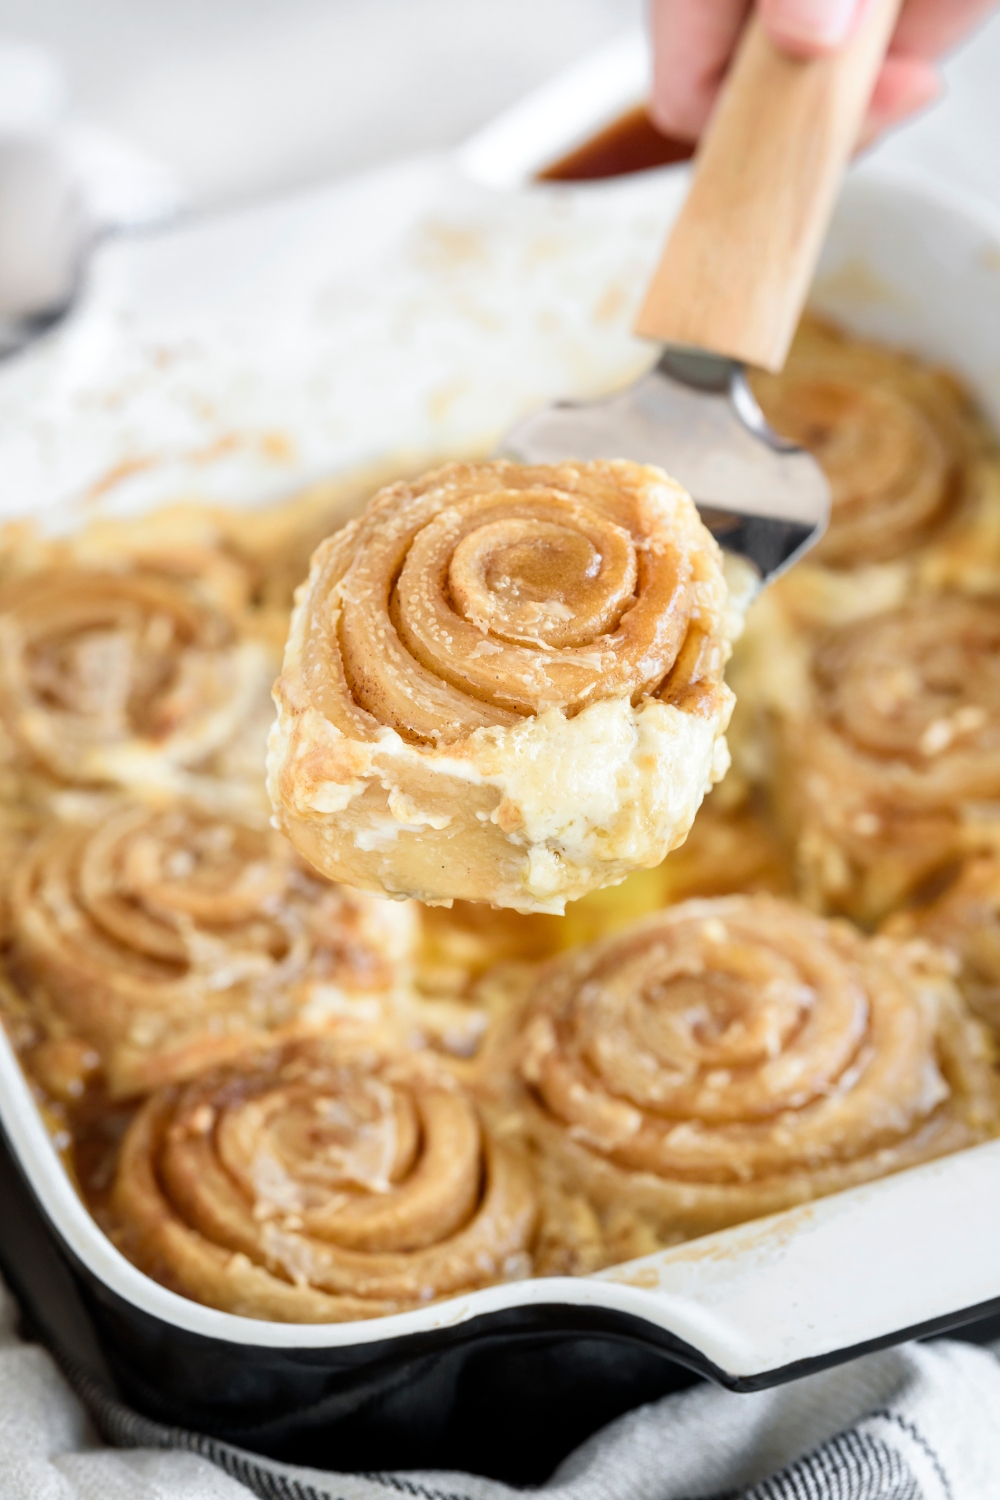 A cinnamon roll on a spatula lifted above a baking dish filled with more cinnamon rolls.